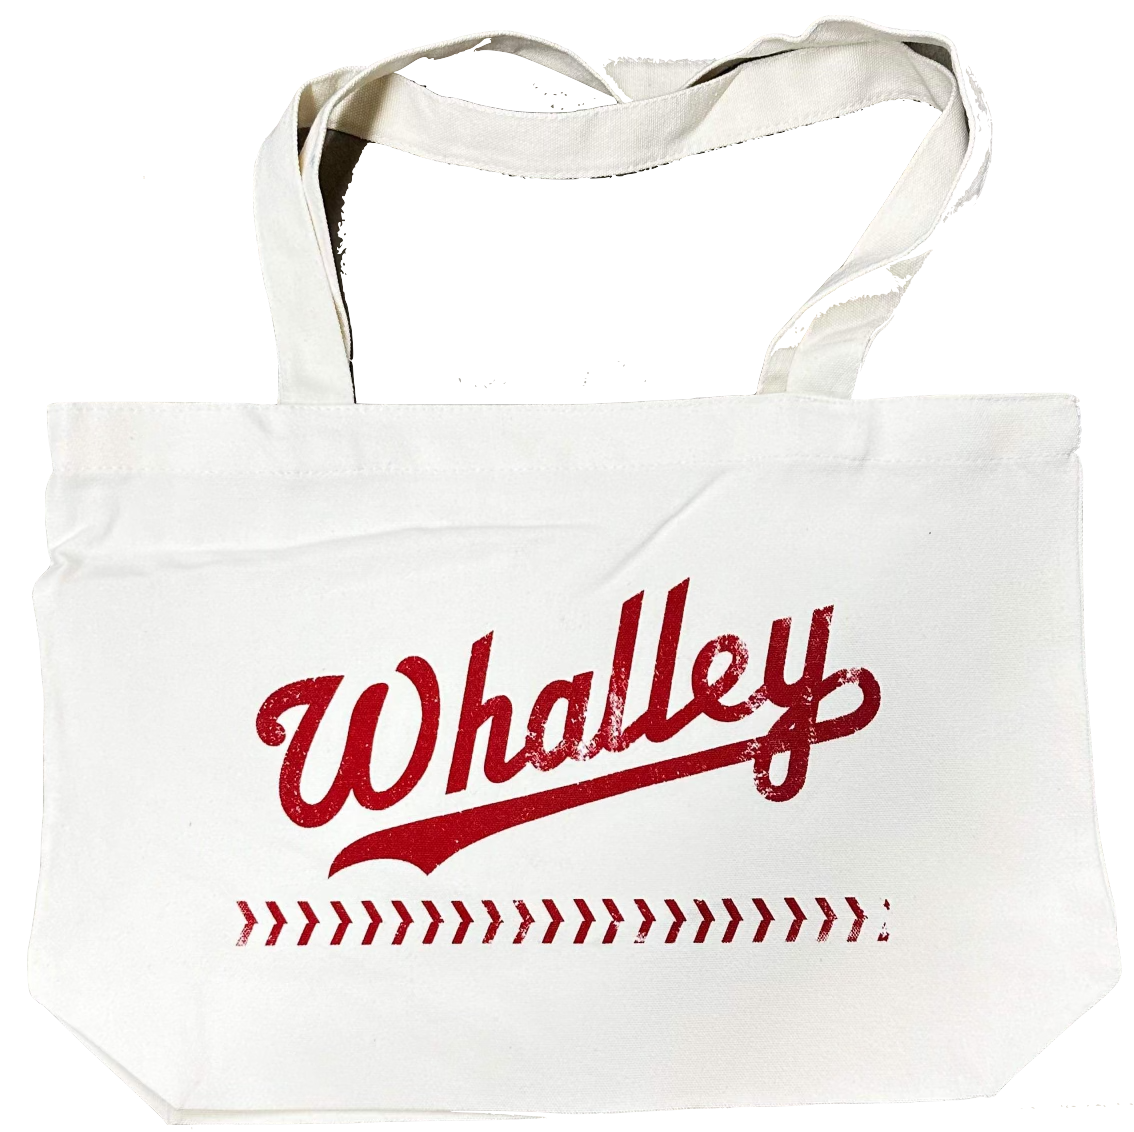 Whalley Tote Bag